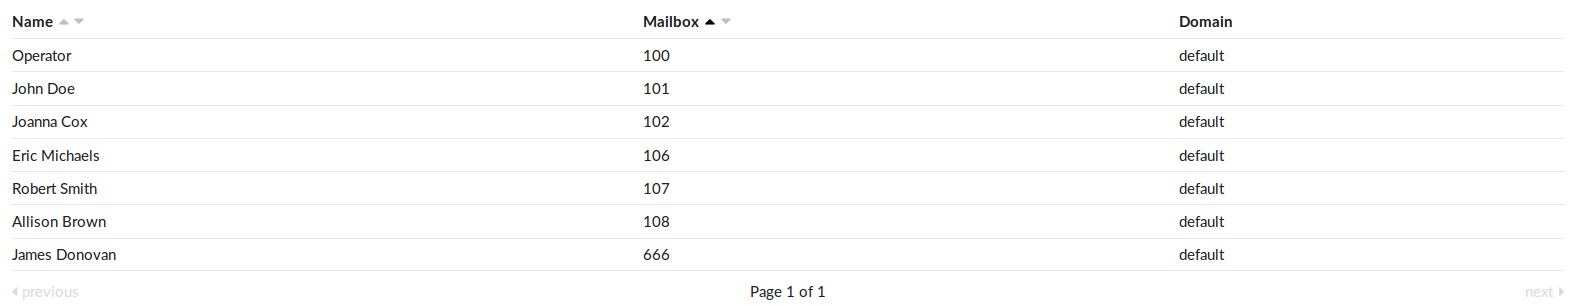 03-mailboxes.png